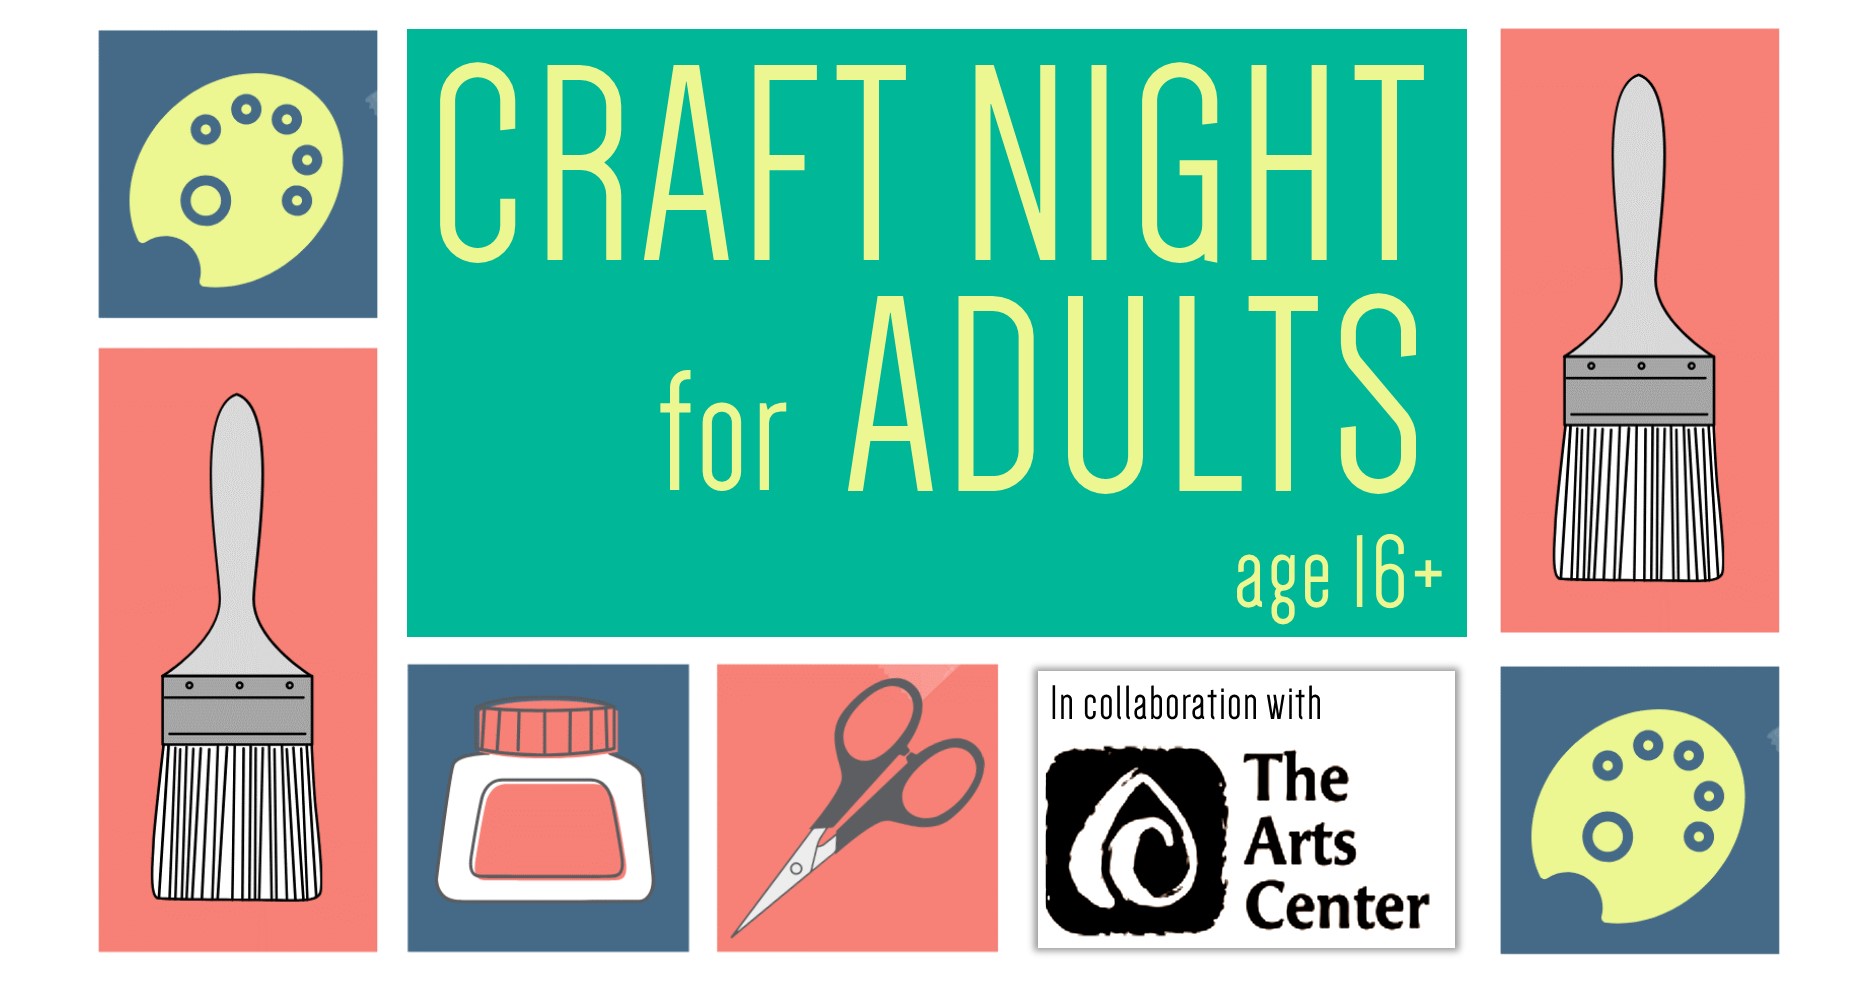 paint brush, palette, glue, scissors, with text that says "Craft Night for Adults 16+"